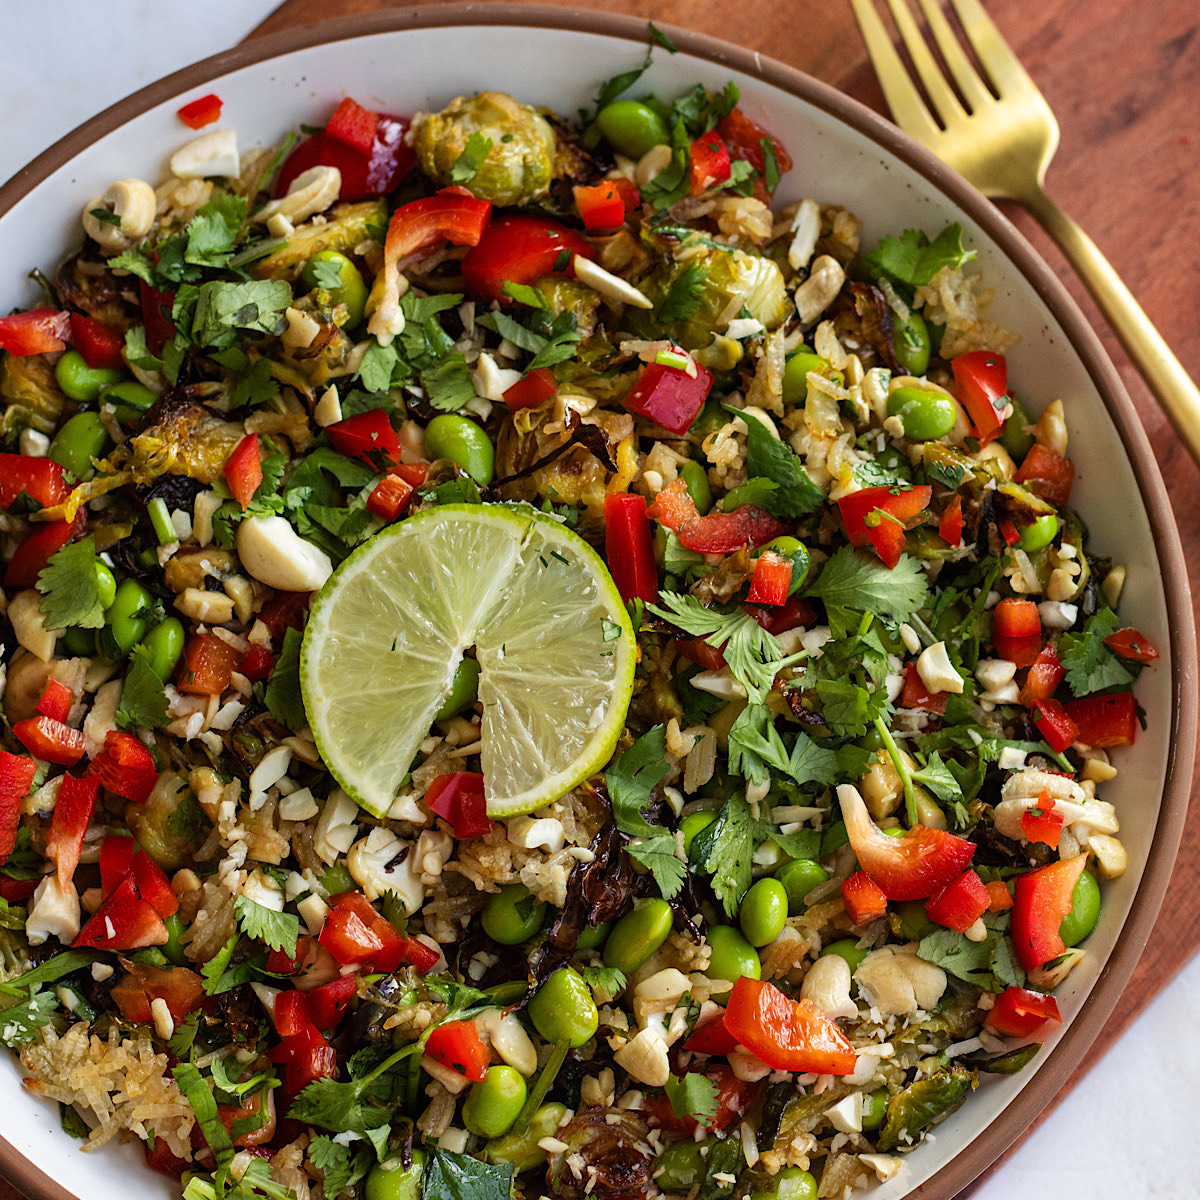 baked brussels sprouts and crispy rice salad